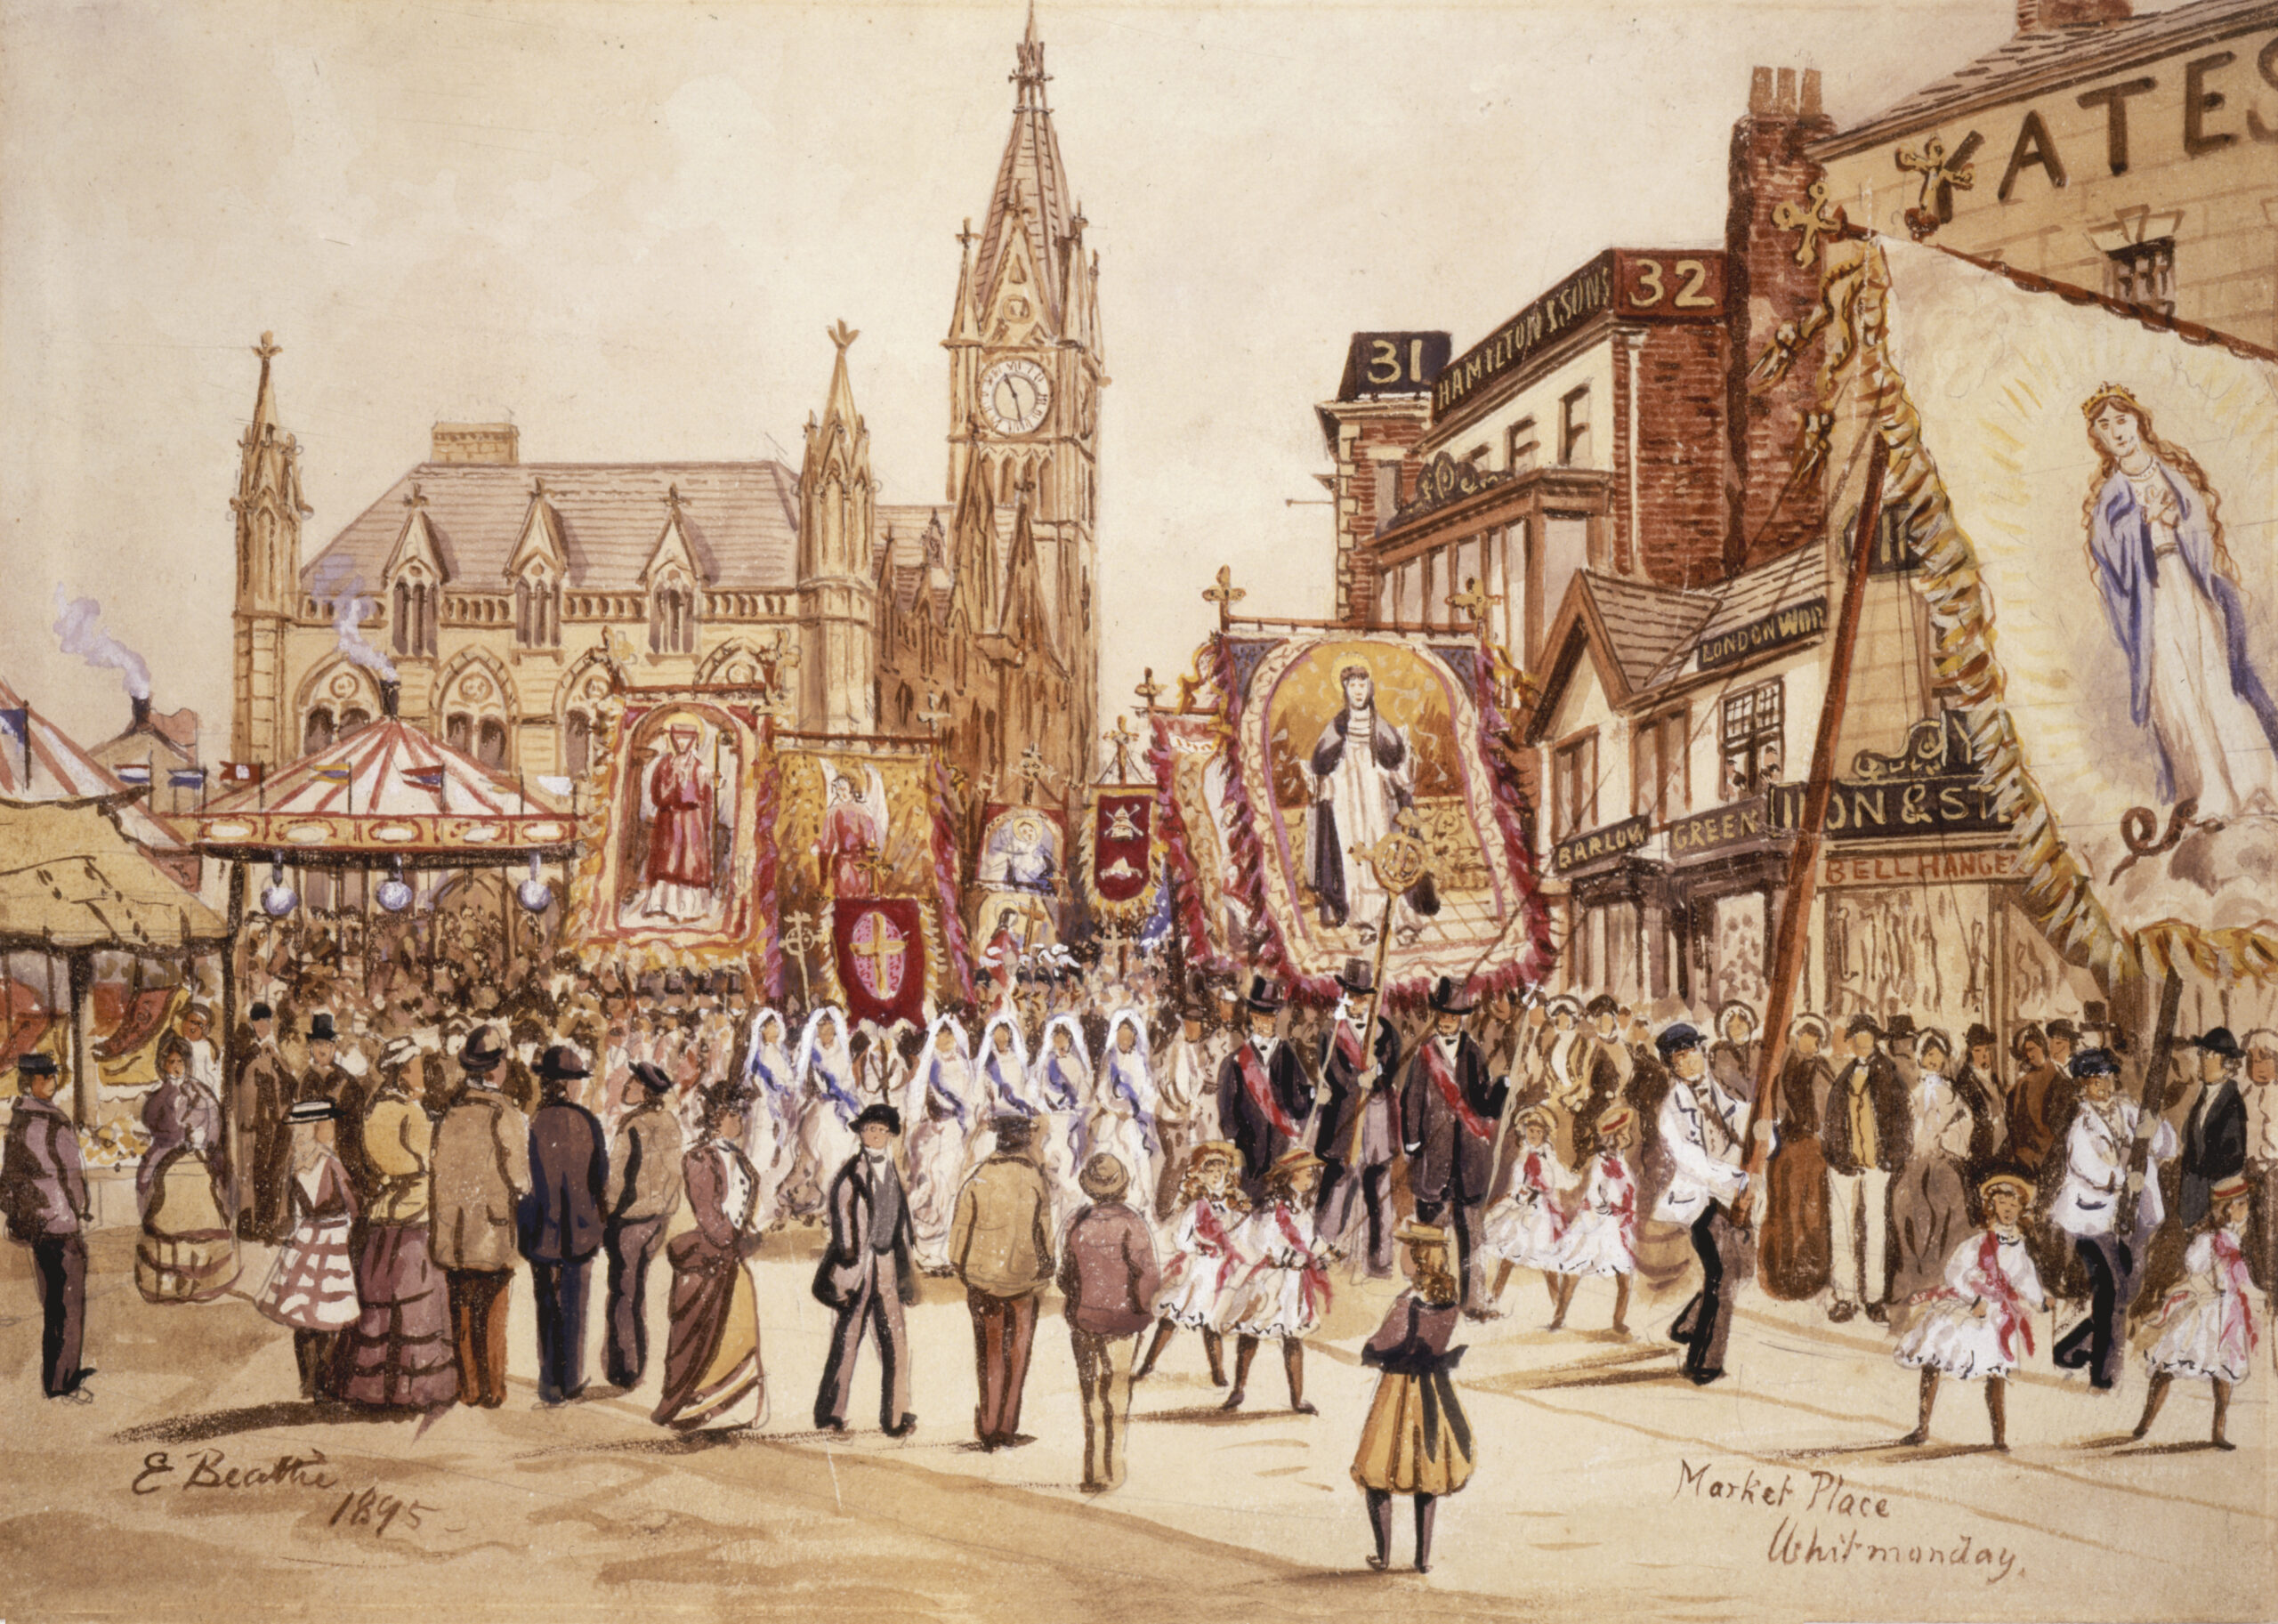 A painting of a religious procession going through the streets of Preston.